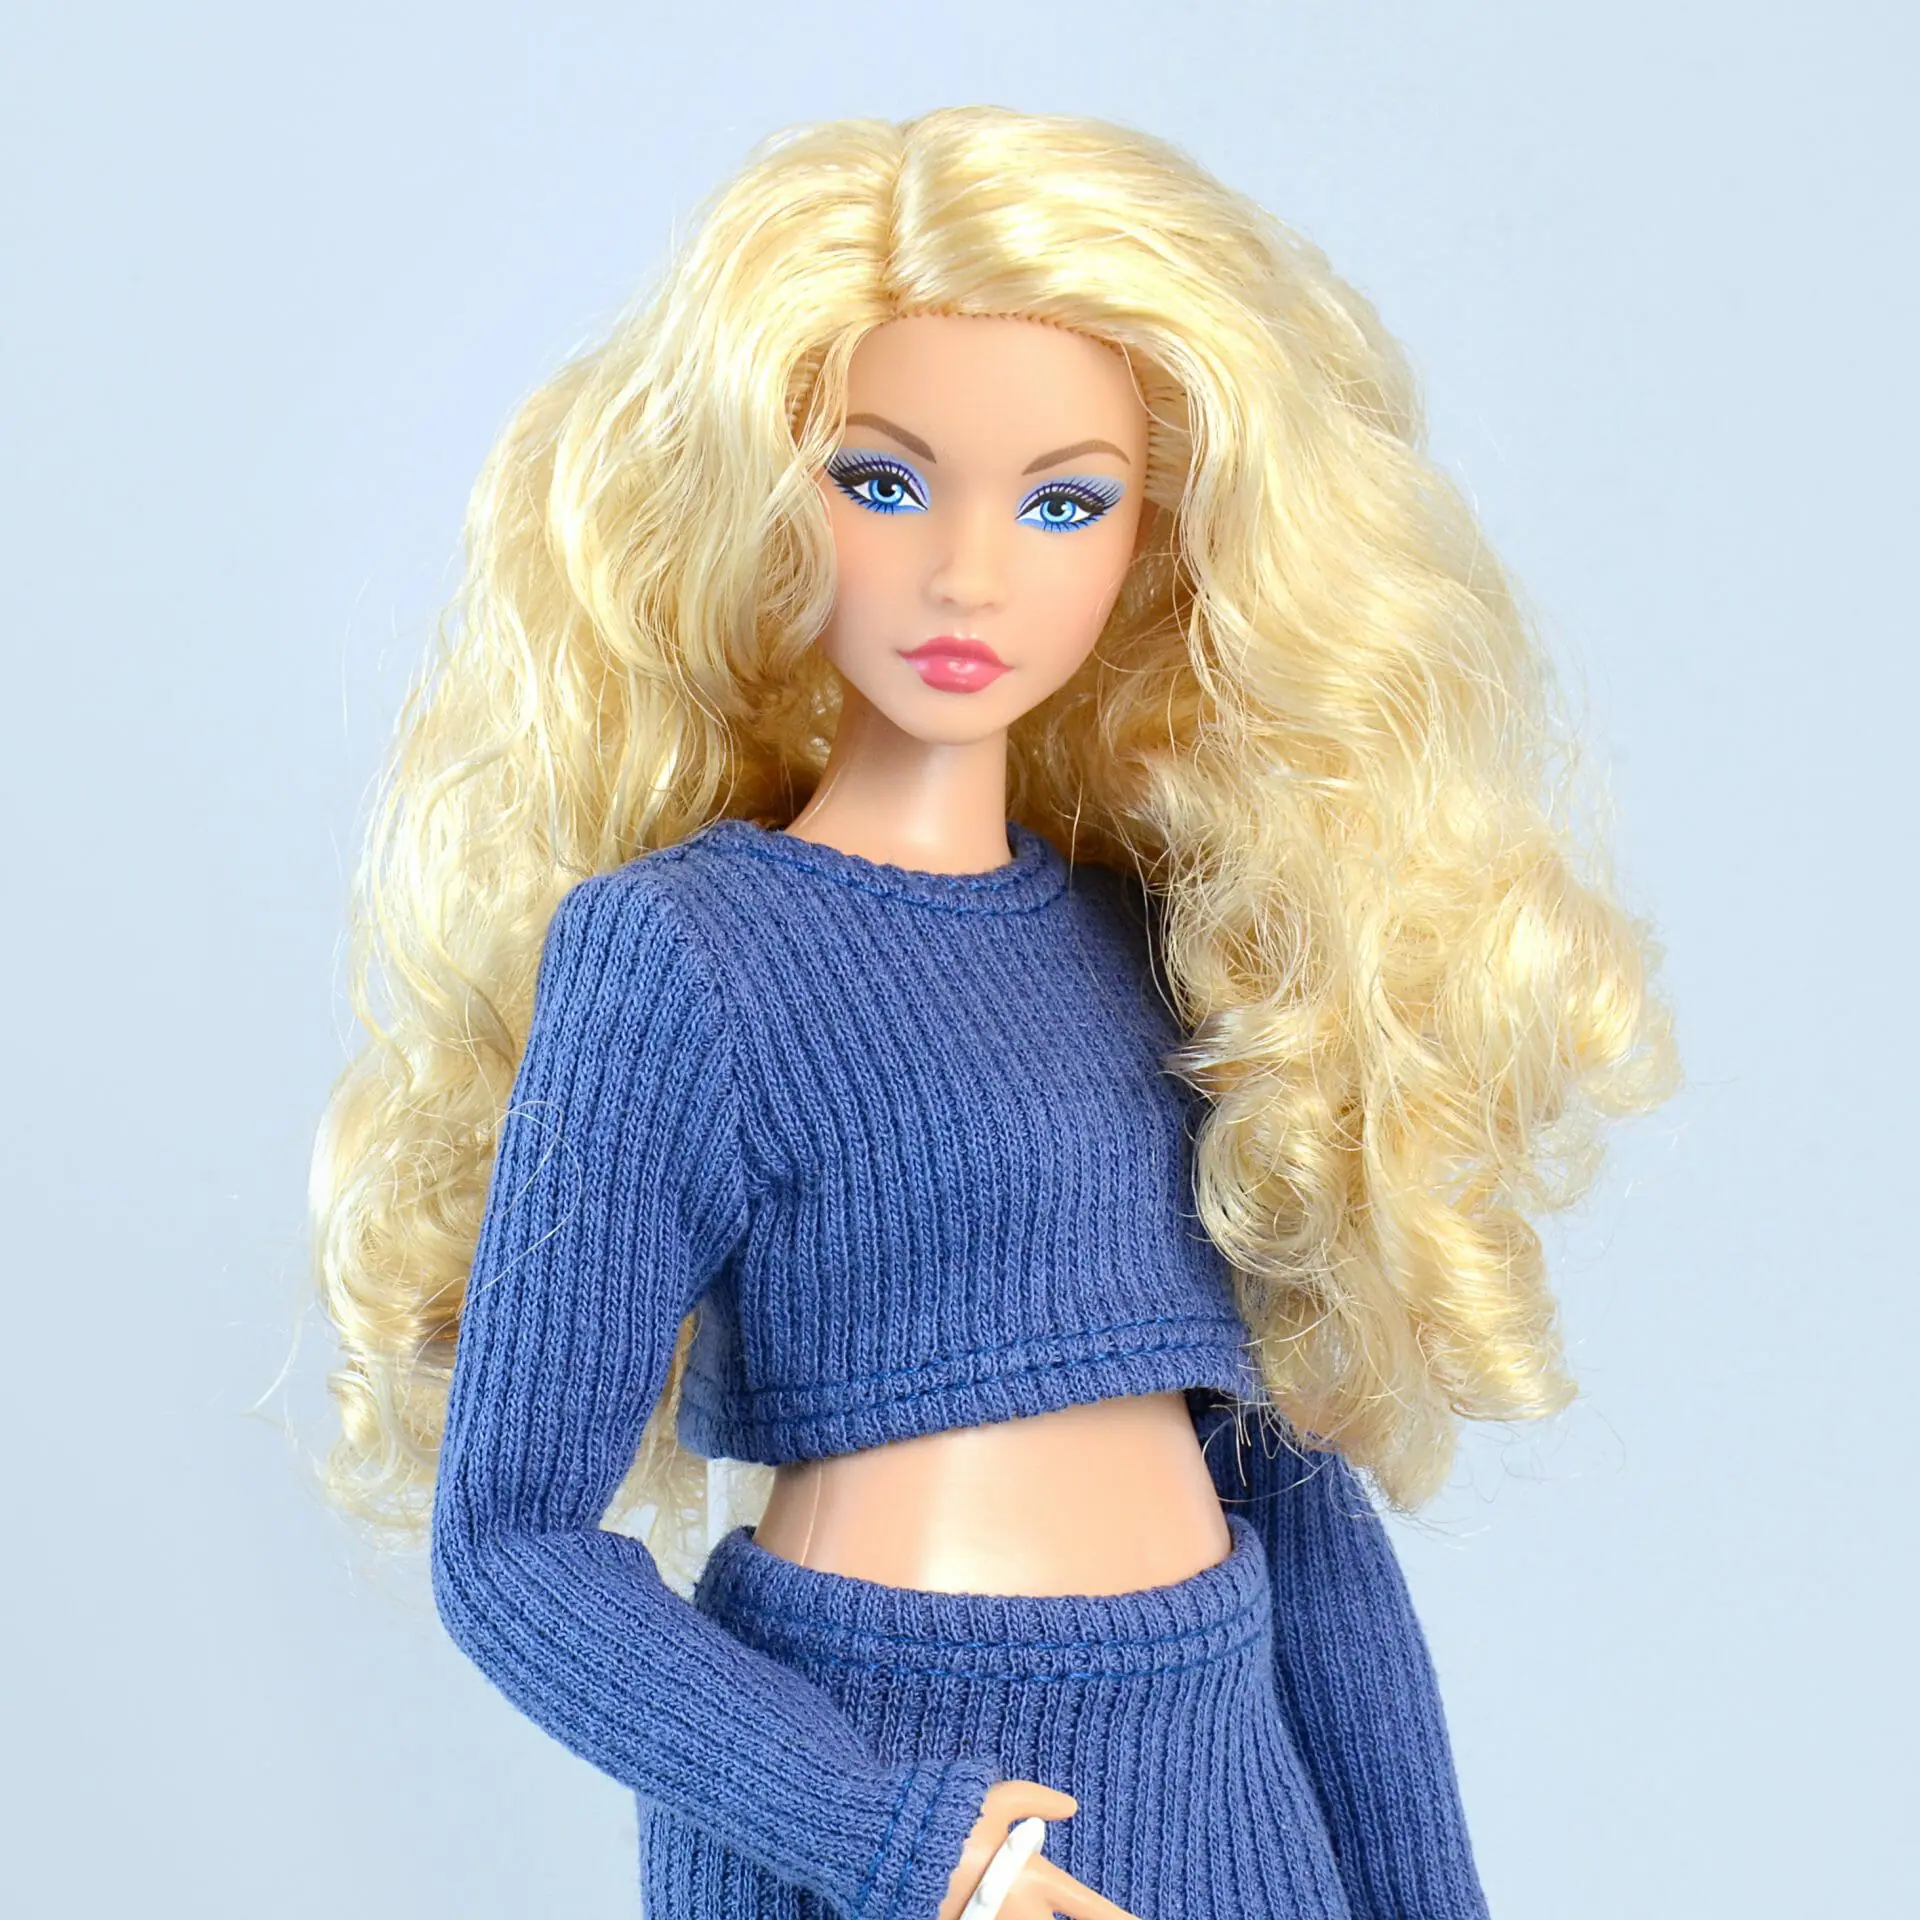 Set of clothes for Barbie Curvy dolls (jumper and skirt)